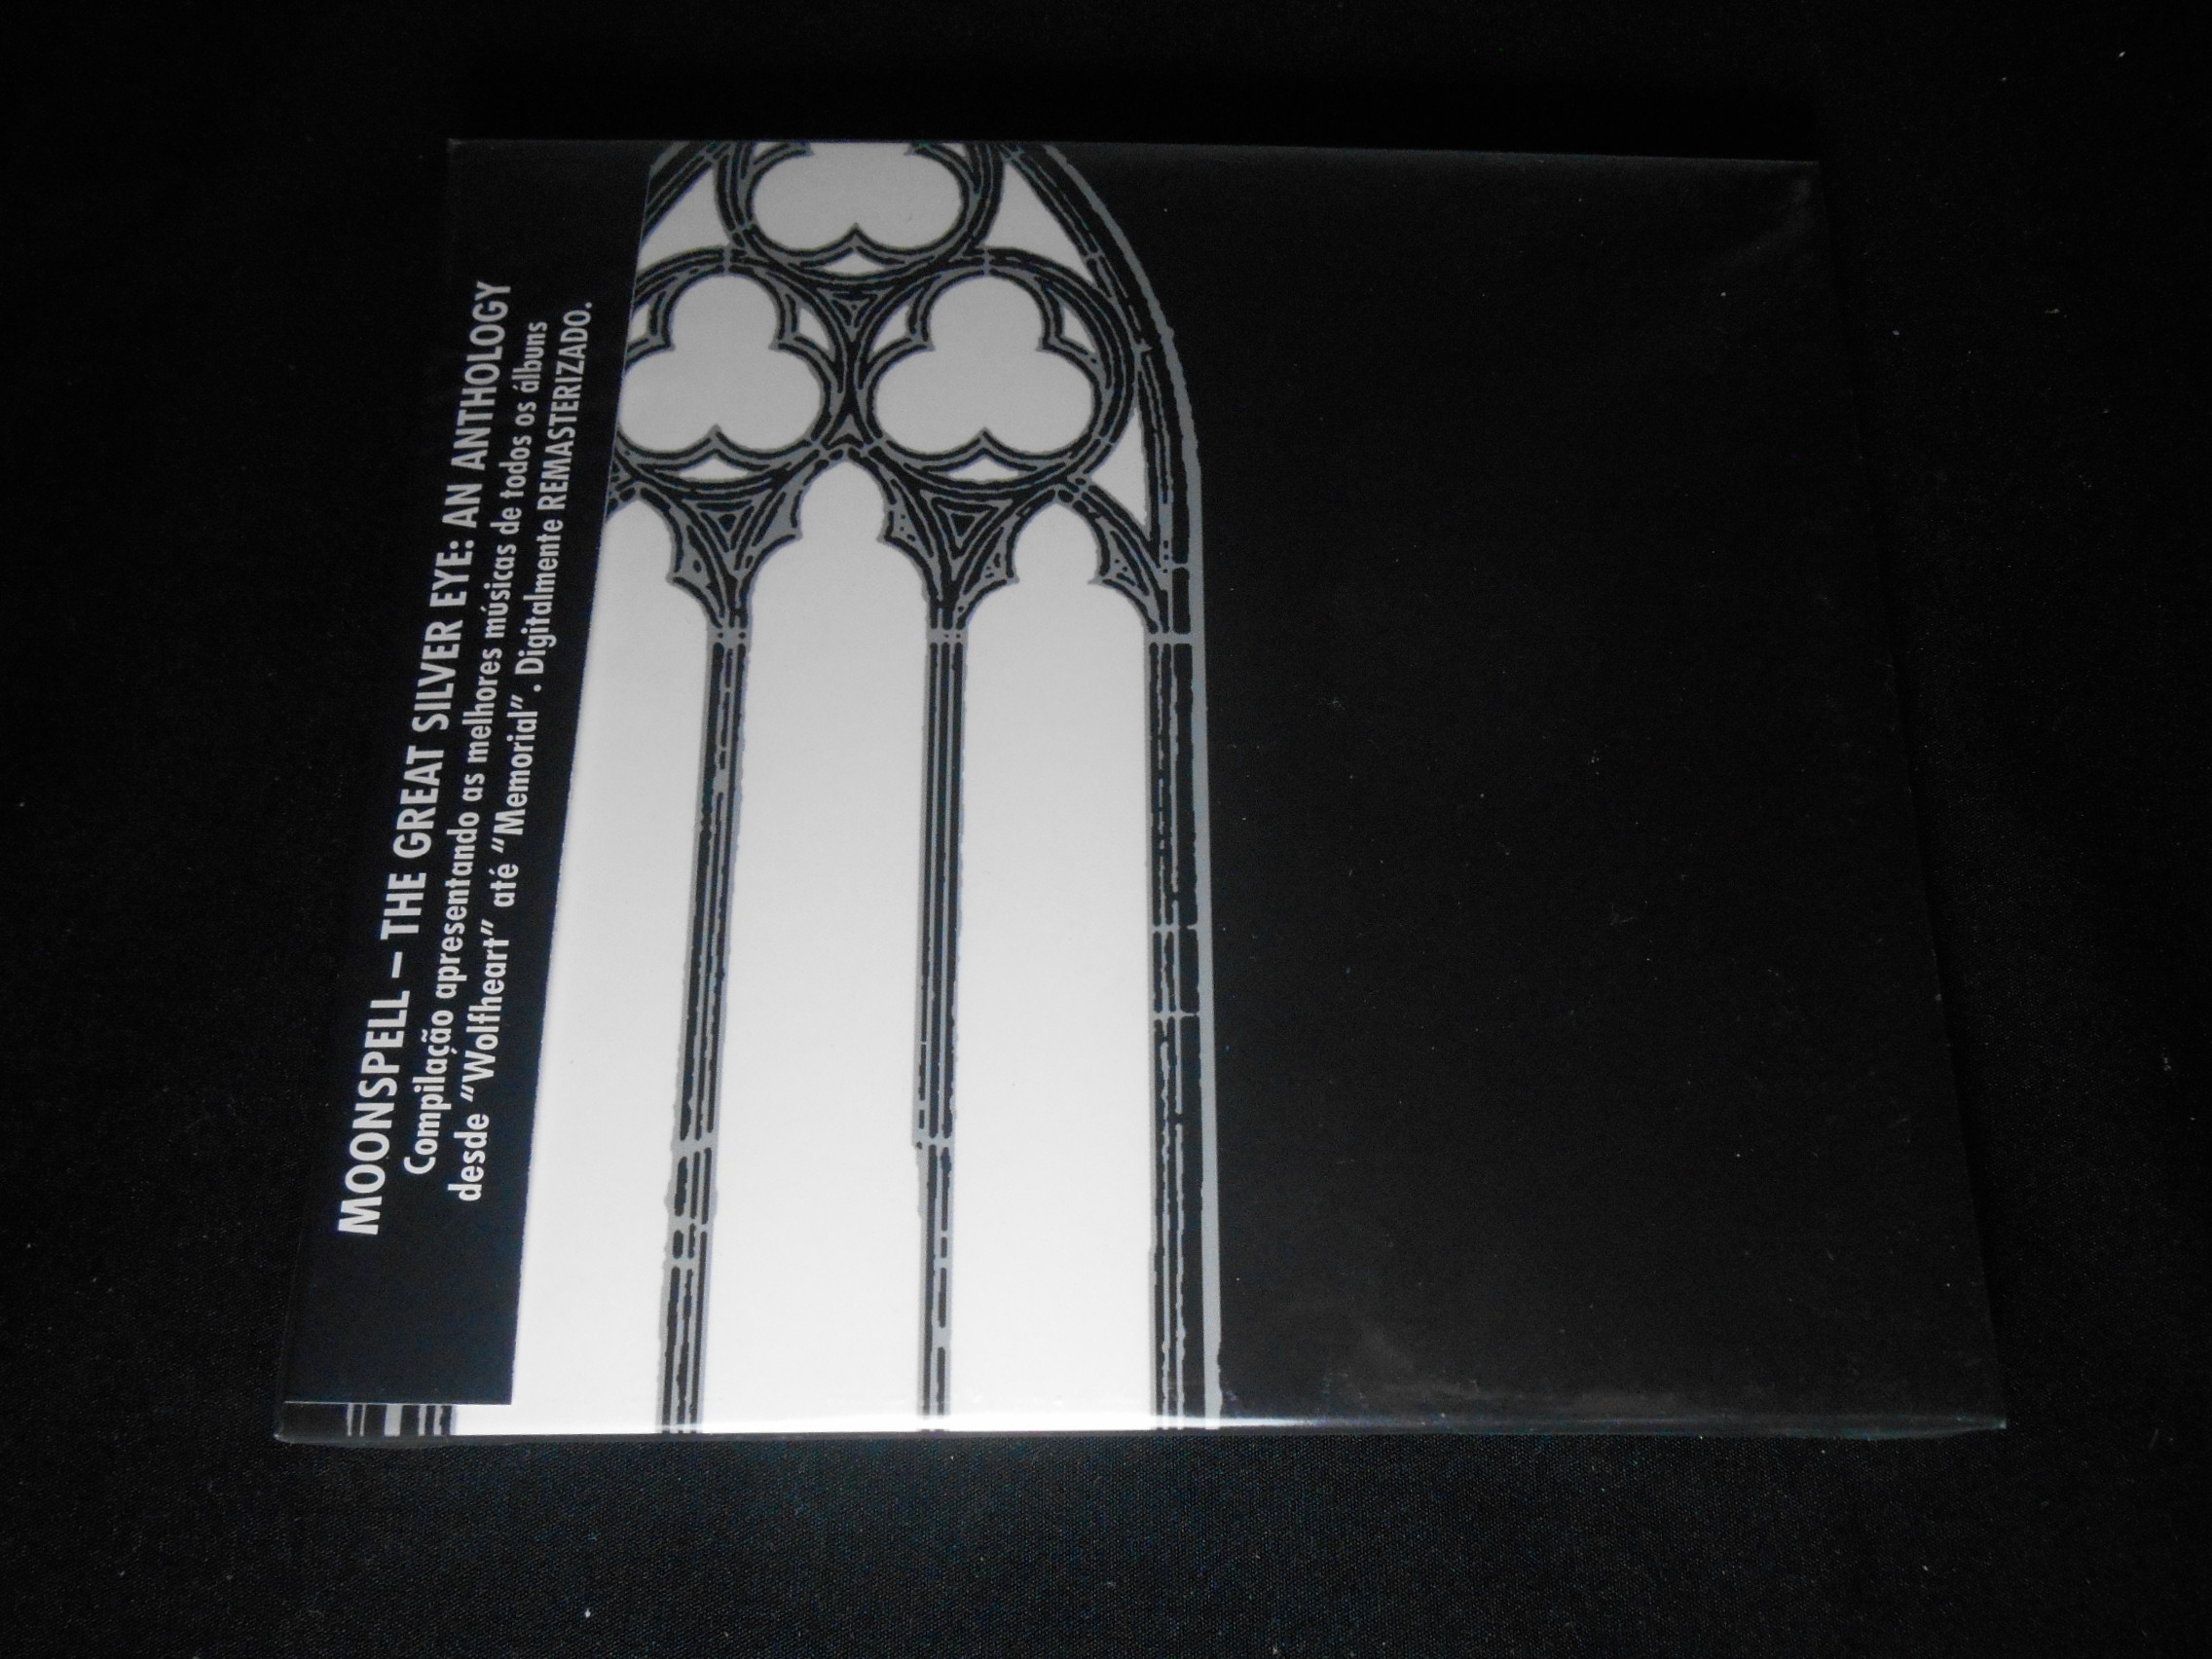 CD - Moonspell - The Great Silver Eye An Anthology (Lacrado/Slipcase)